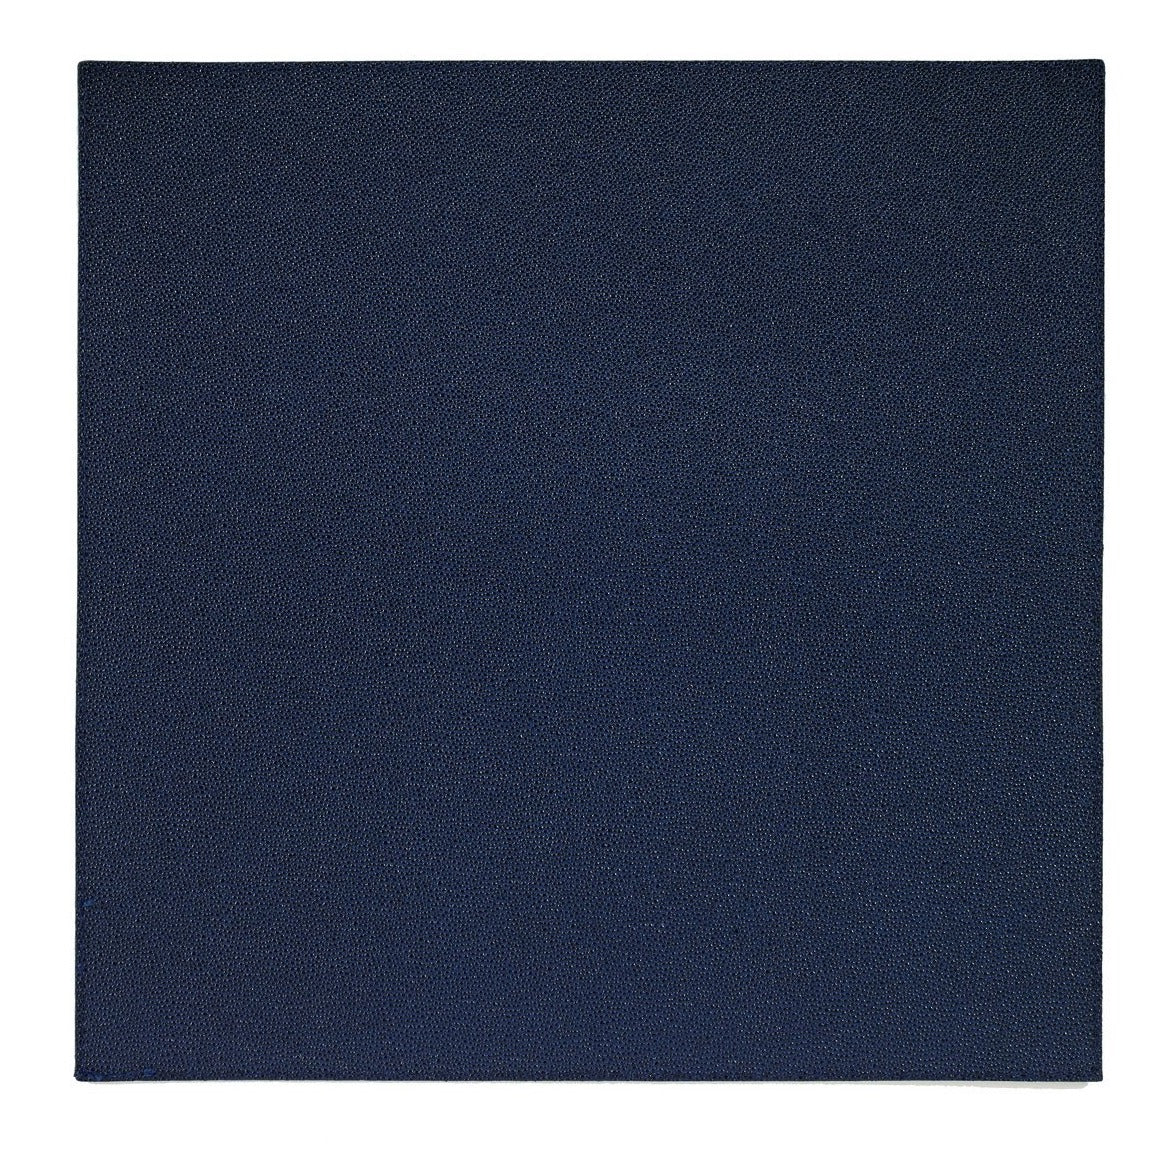 Skate Square Placemat Navy Set of 4